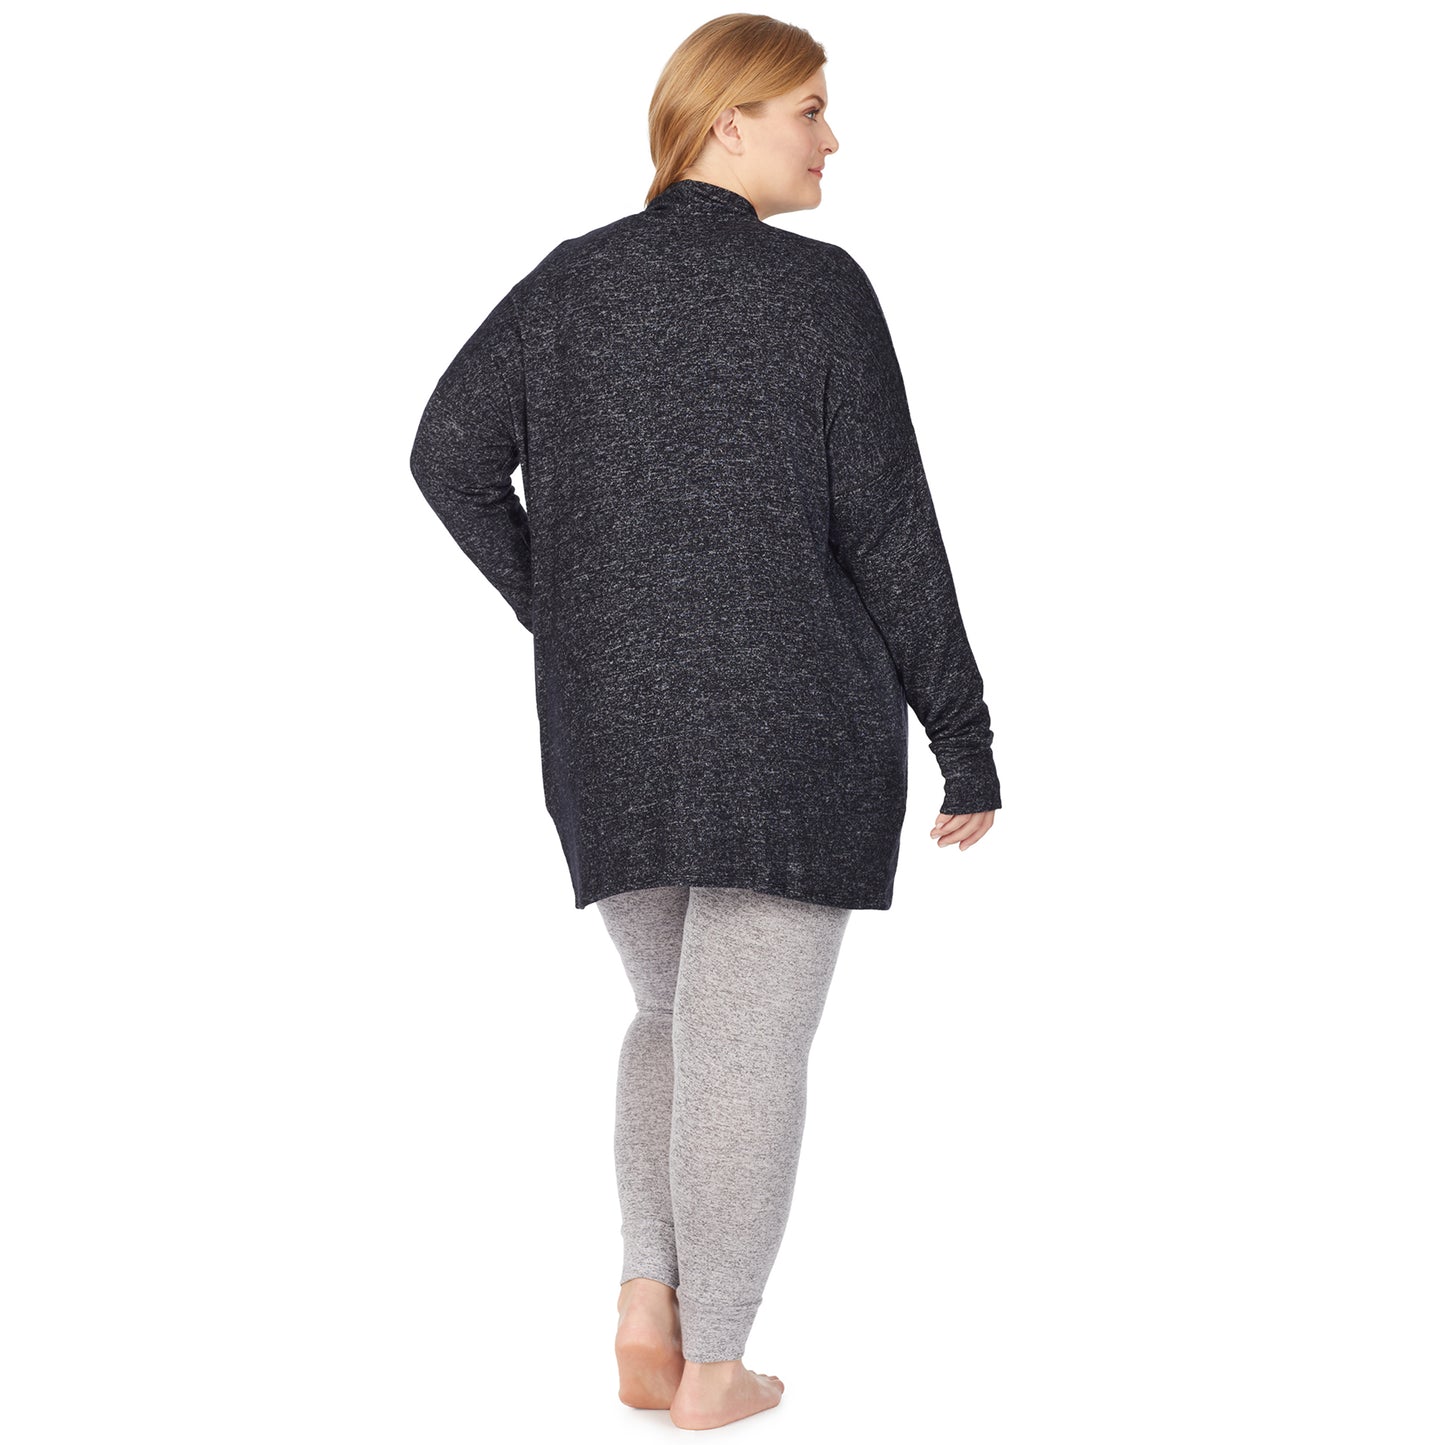 Marled Dark Charcoal; Model is wearing size 1X. She is 5'9", Bust 38", Waist 36", Hips 48.5". @A lady wearing a marled dark charcoal long sleeve wrap plus.